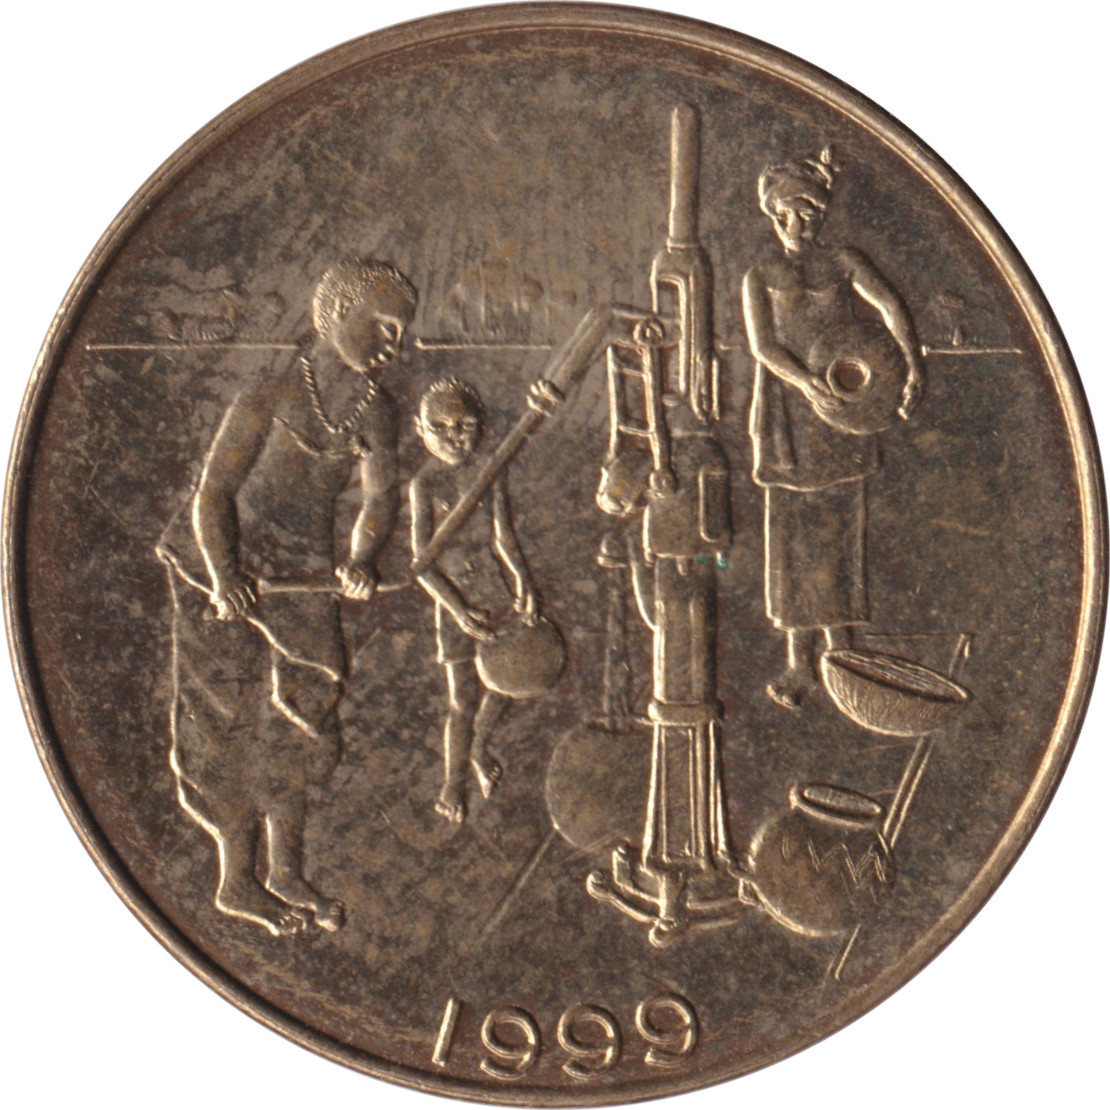 10 francs - Water well